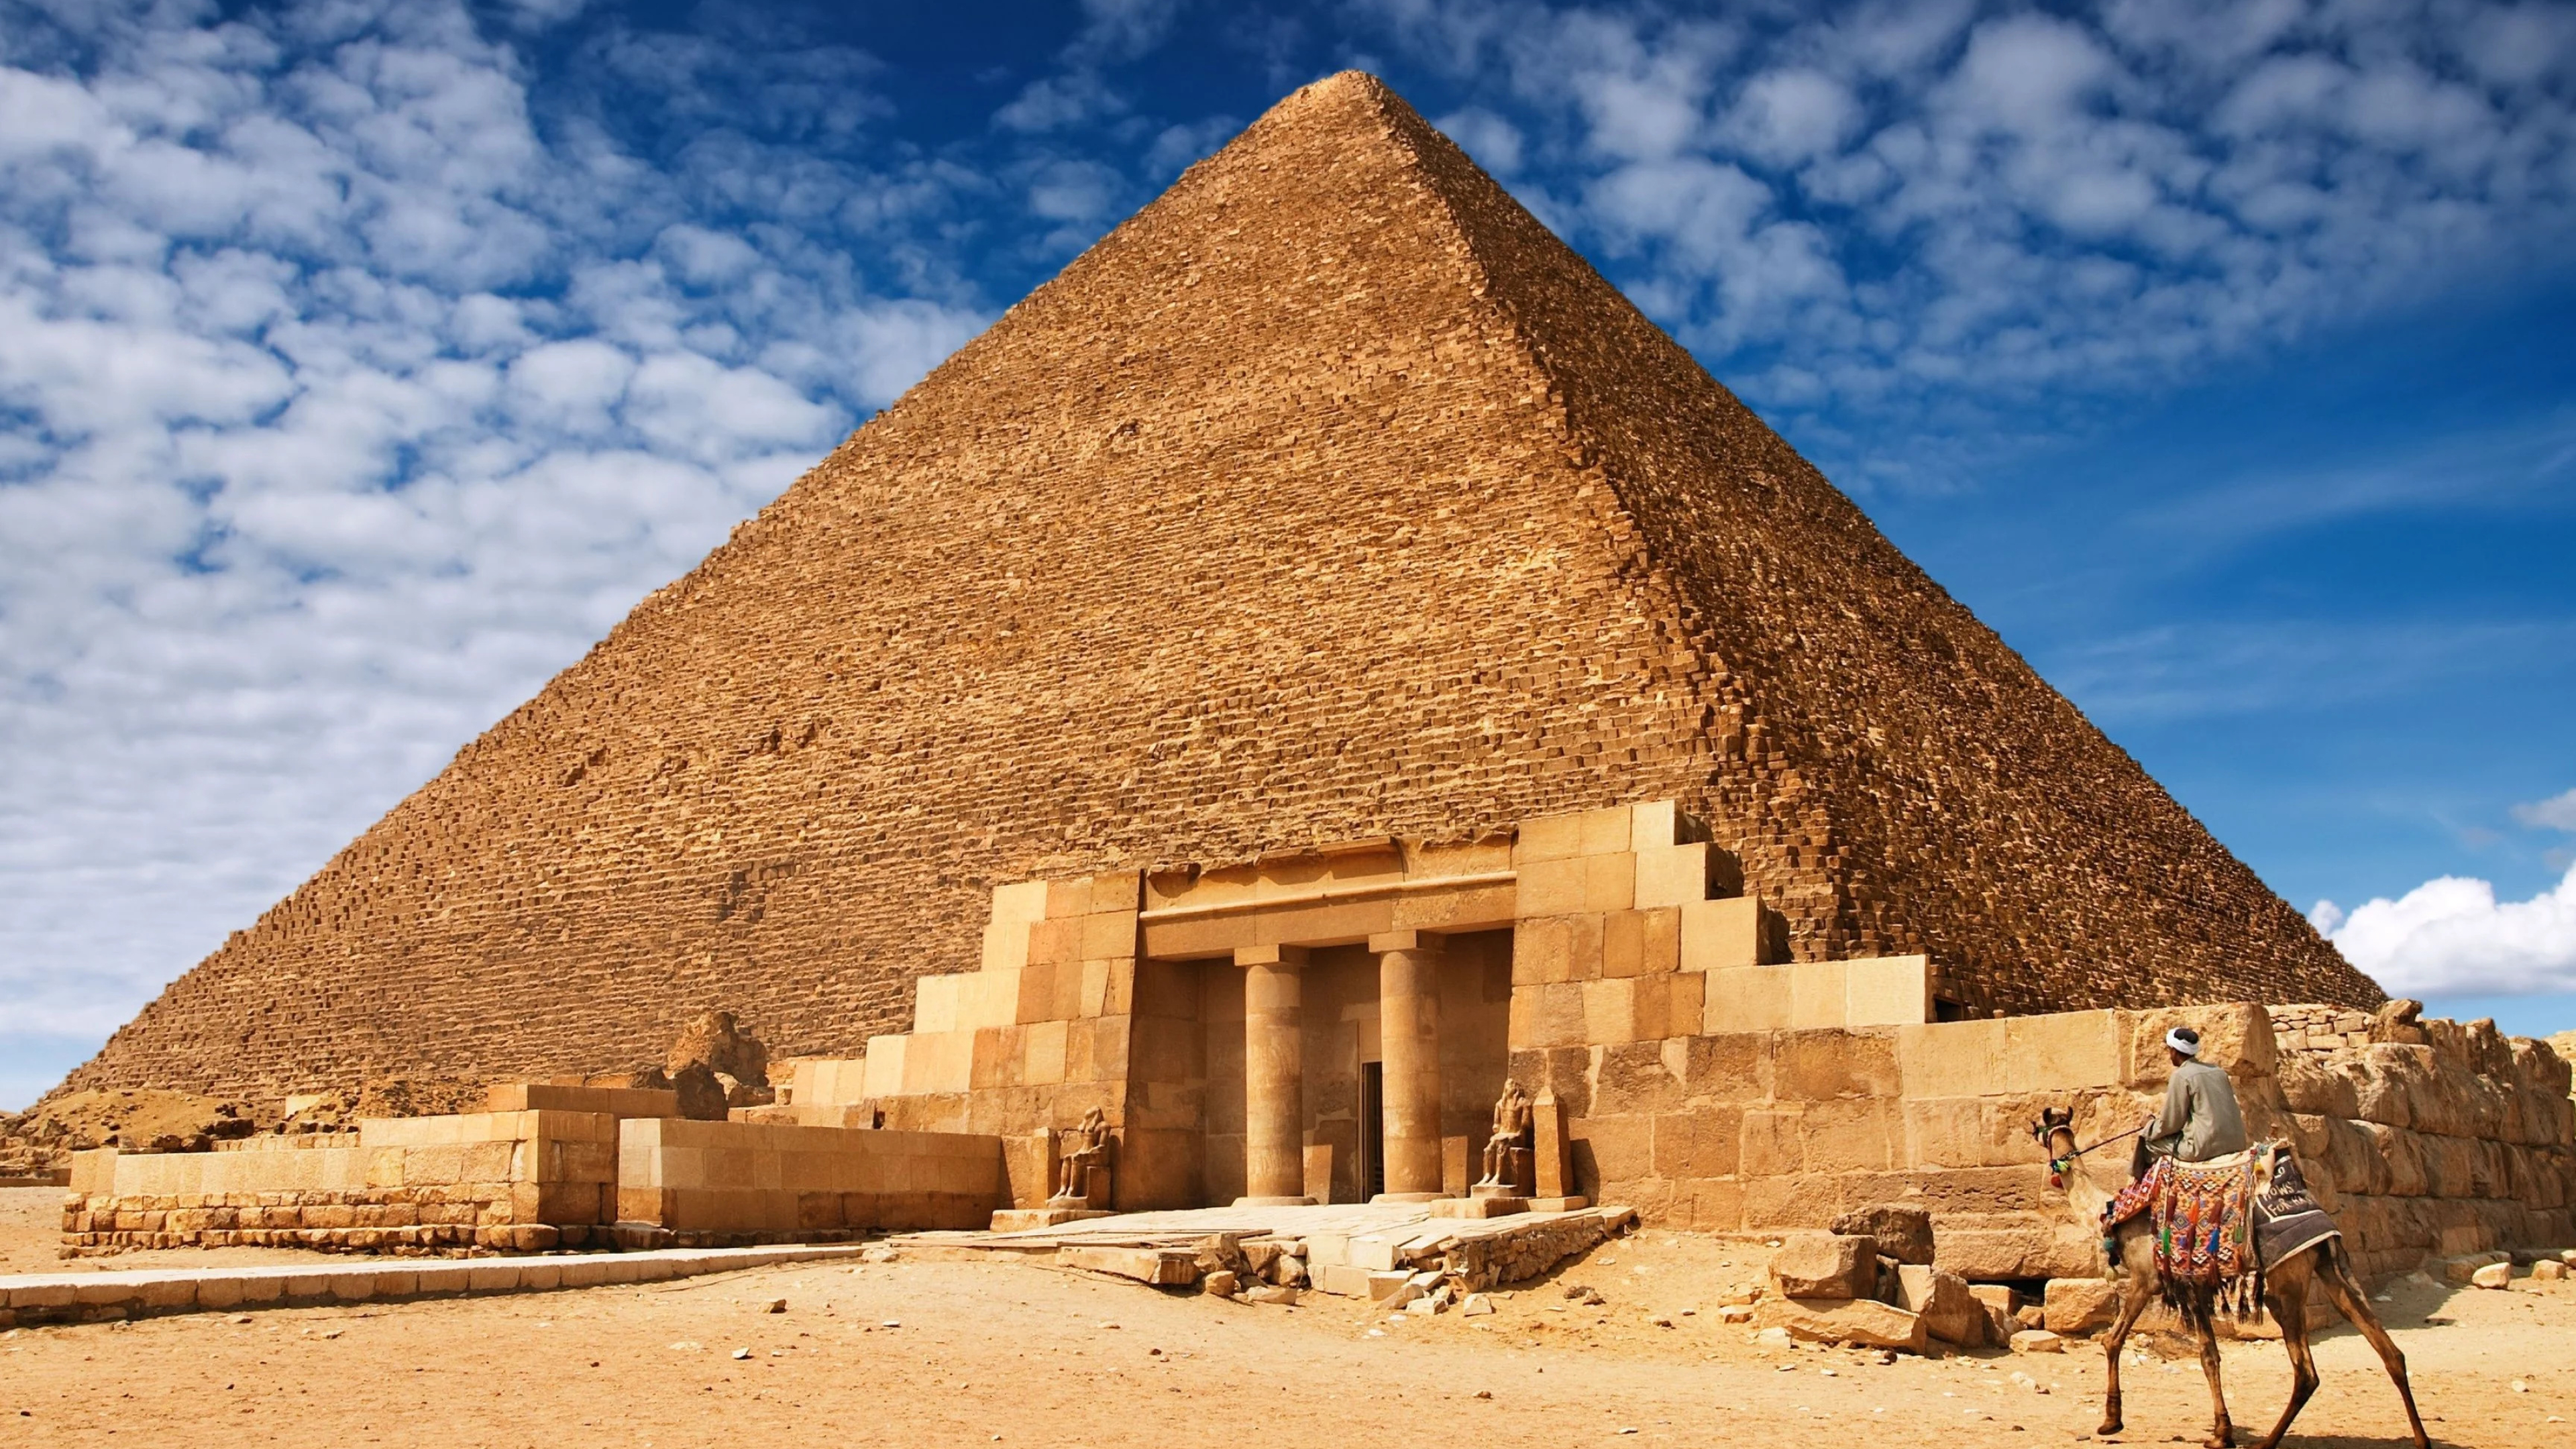 Pyramids of Giza, Egyptian pyramids wallpapers, Timeless backgrounds, Architectural marvels, 3840x2160 4K Desktop